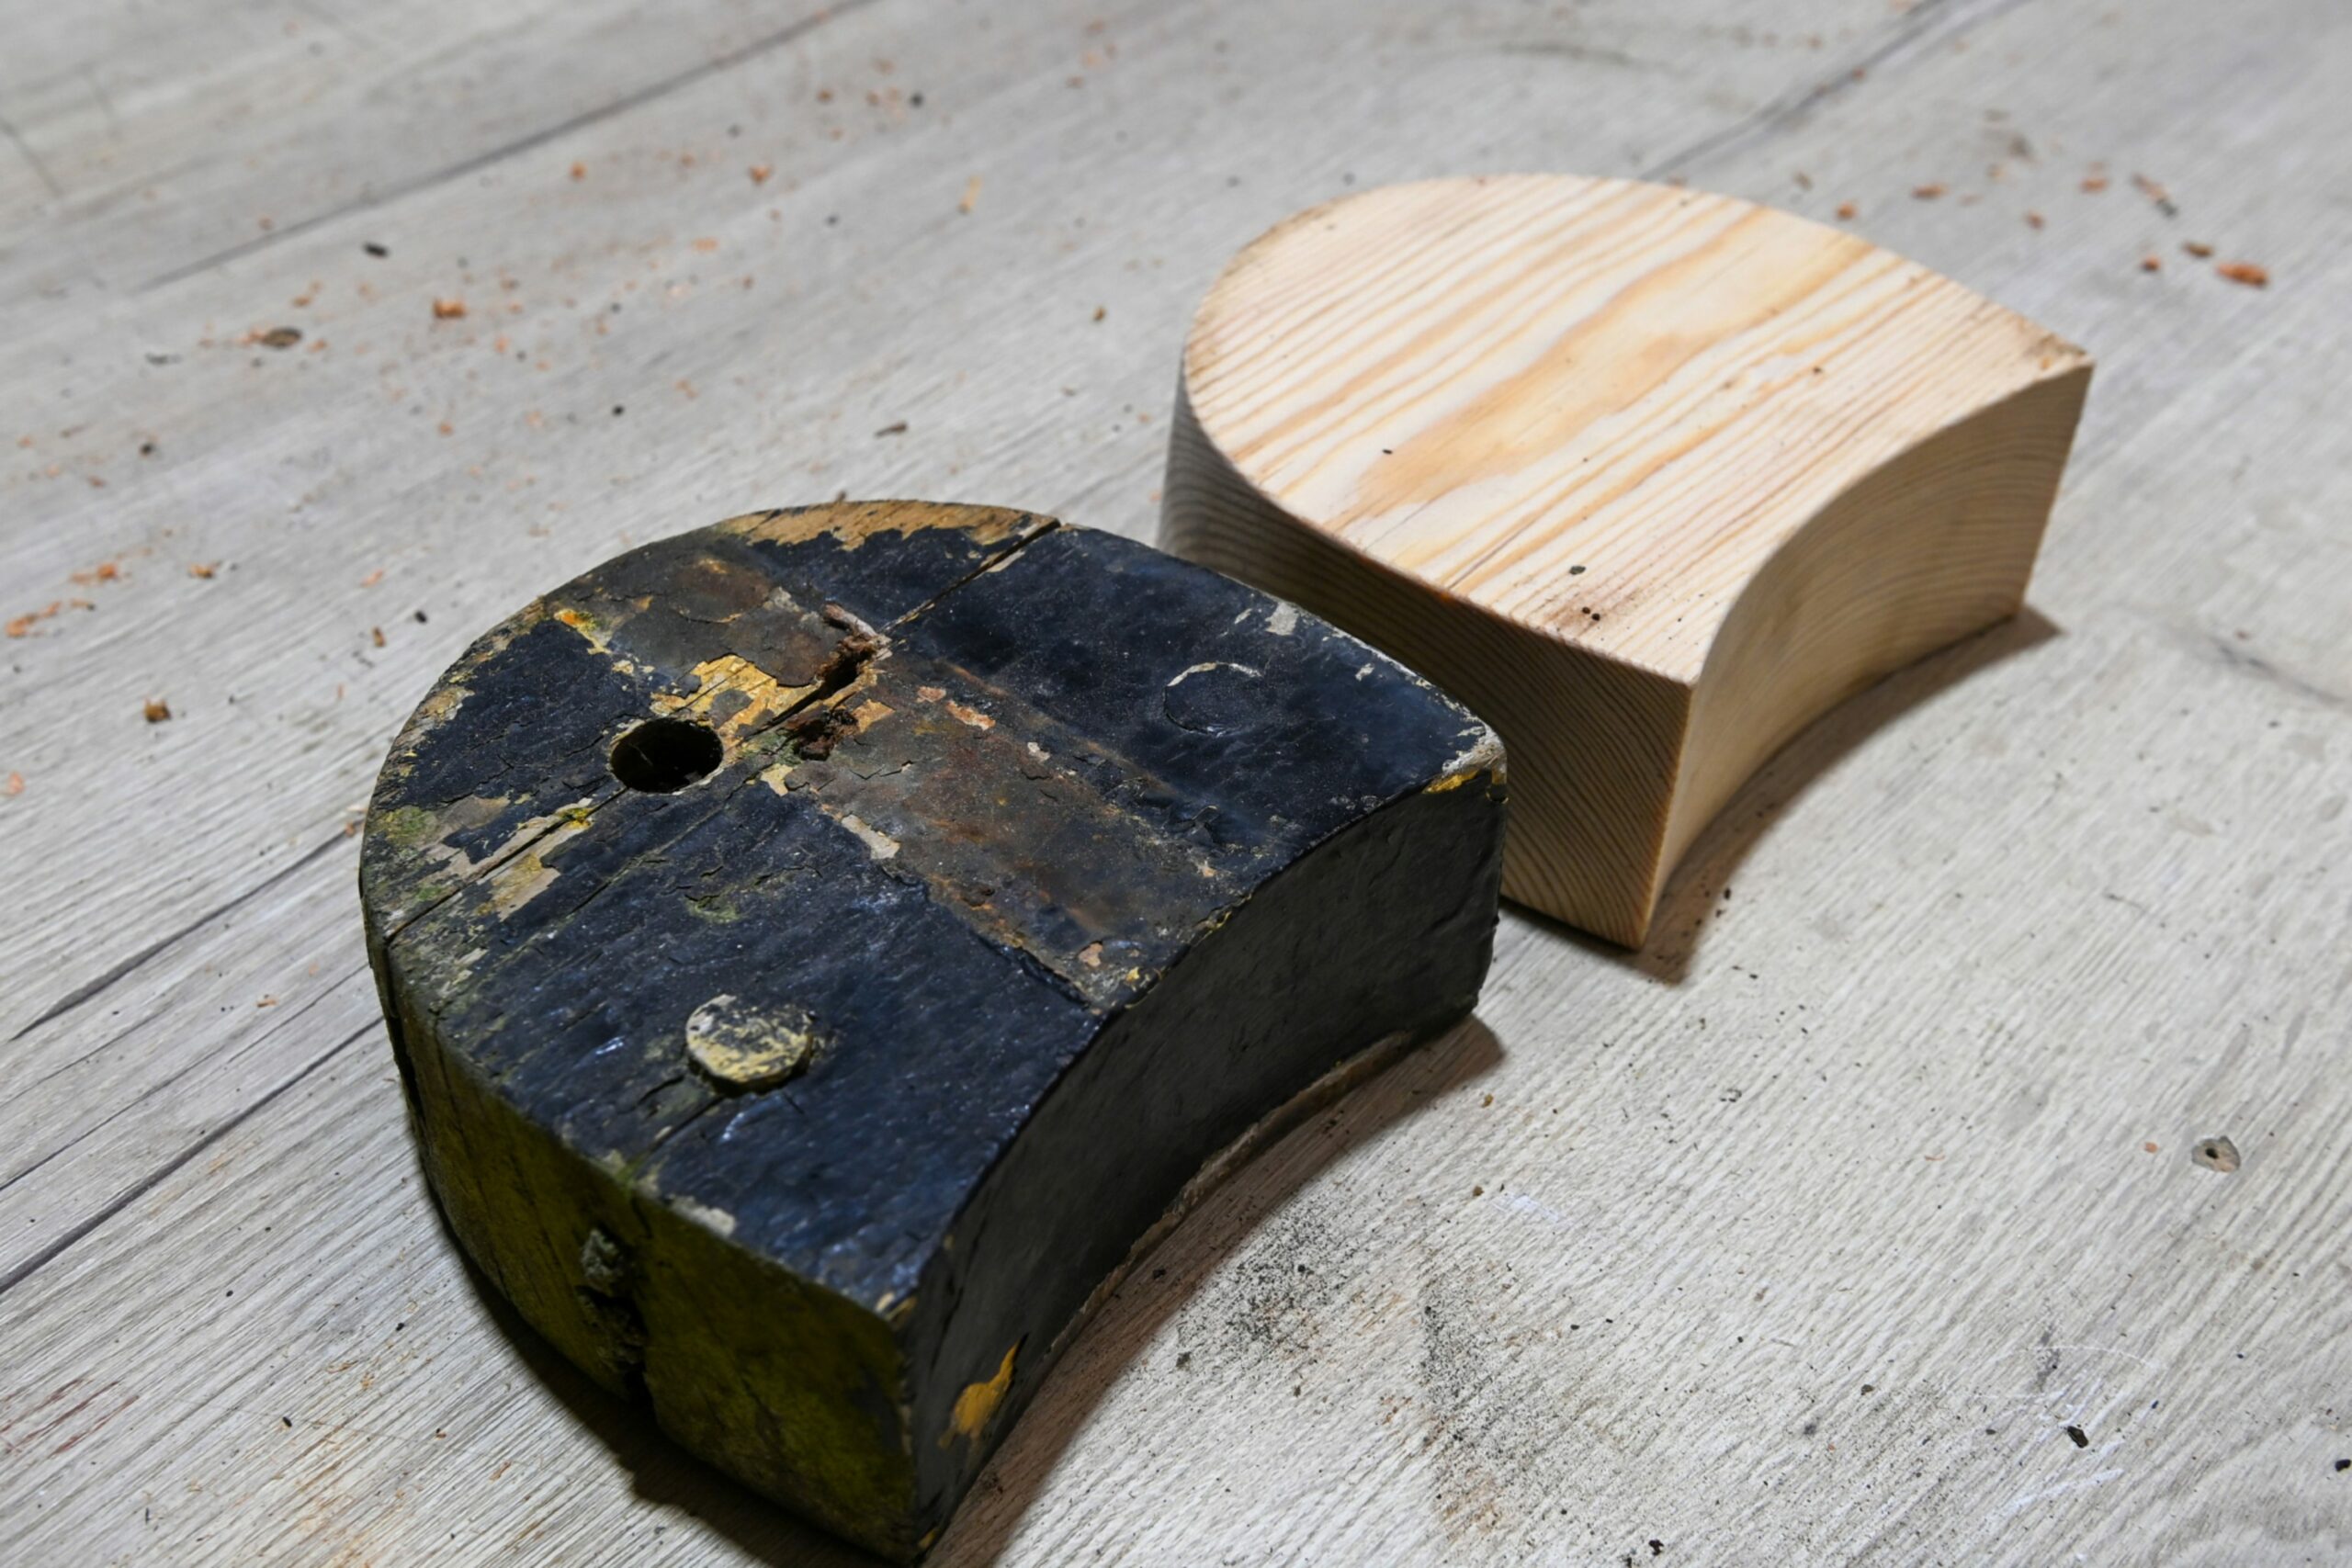 The old and new heel side by side. The old one black, the new with clean wood. 